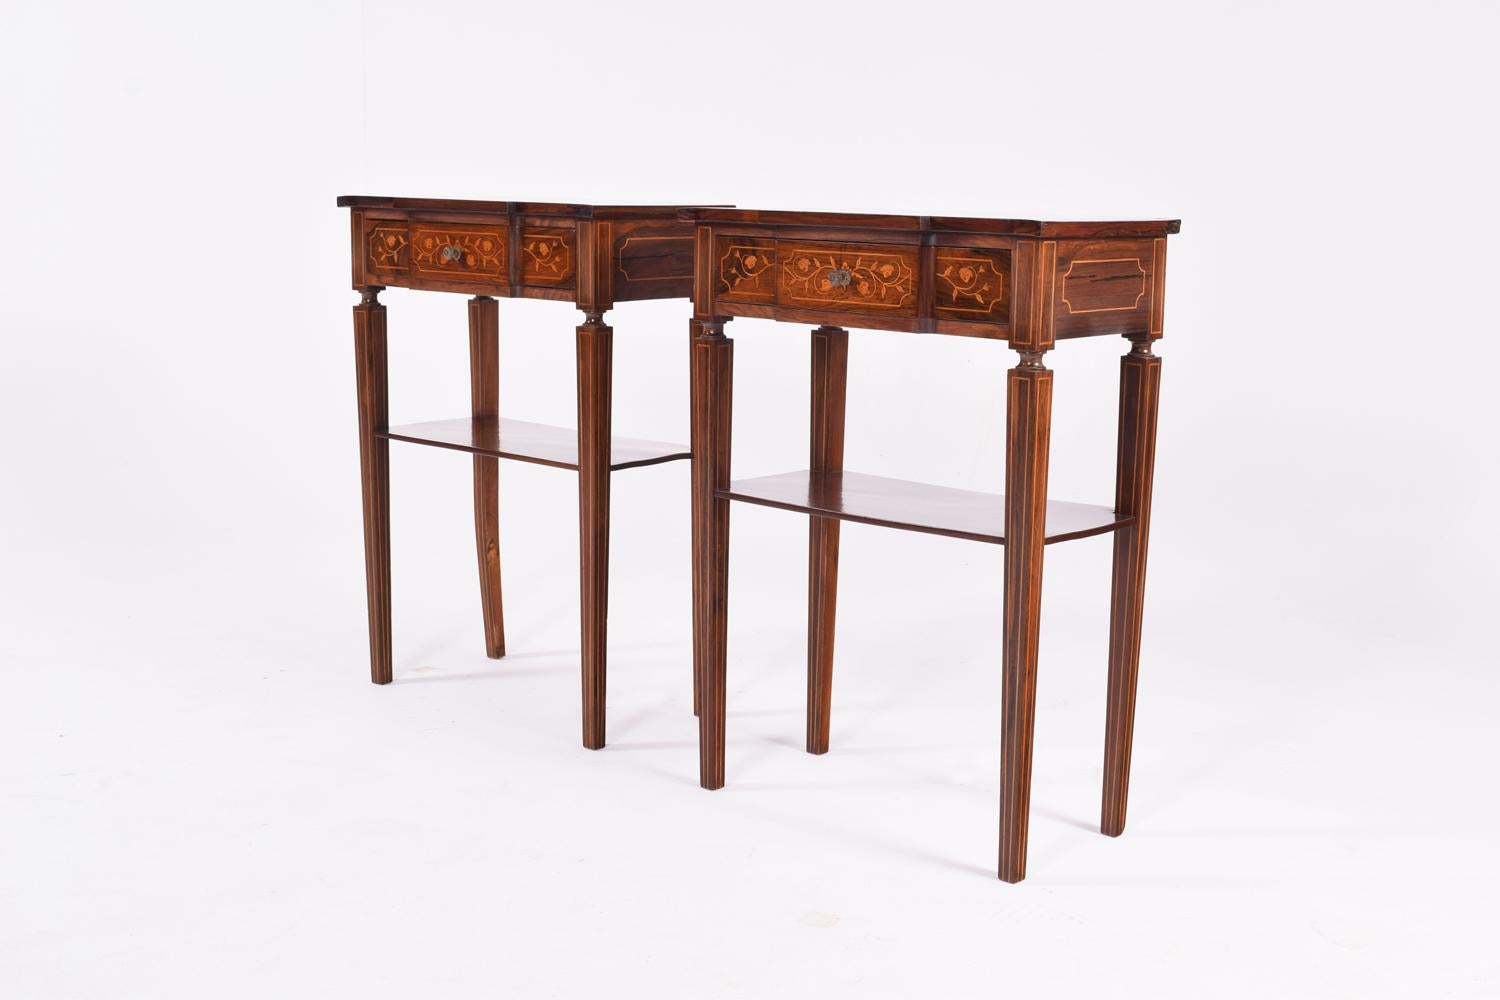 Pair of D. Maria bedside tables, Portuguese. Folded and clad with rosewood. Rich decoration in inlays with floral motifs. Drawer and shelf. Brass handles.